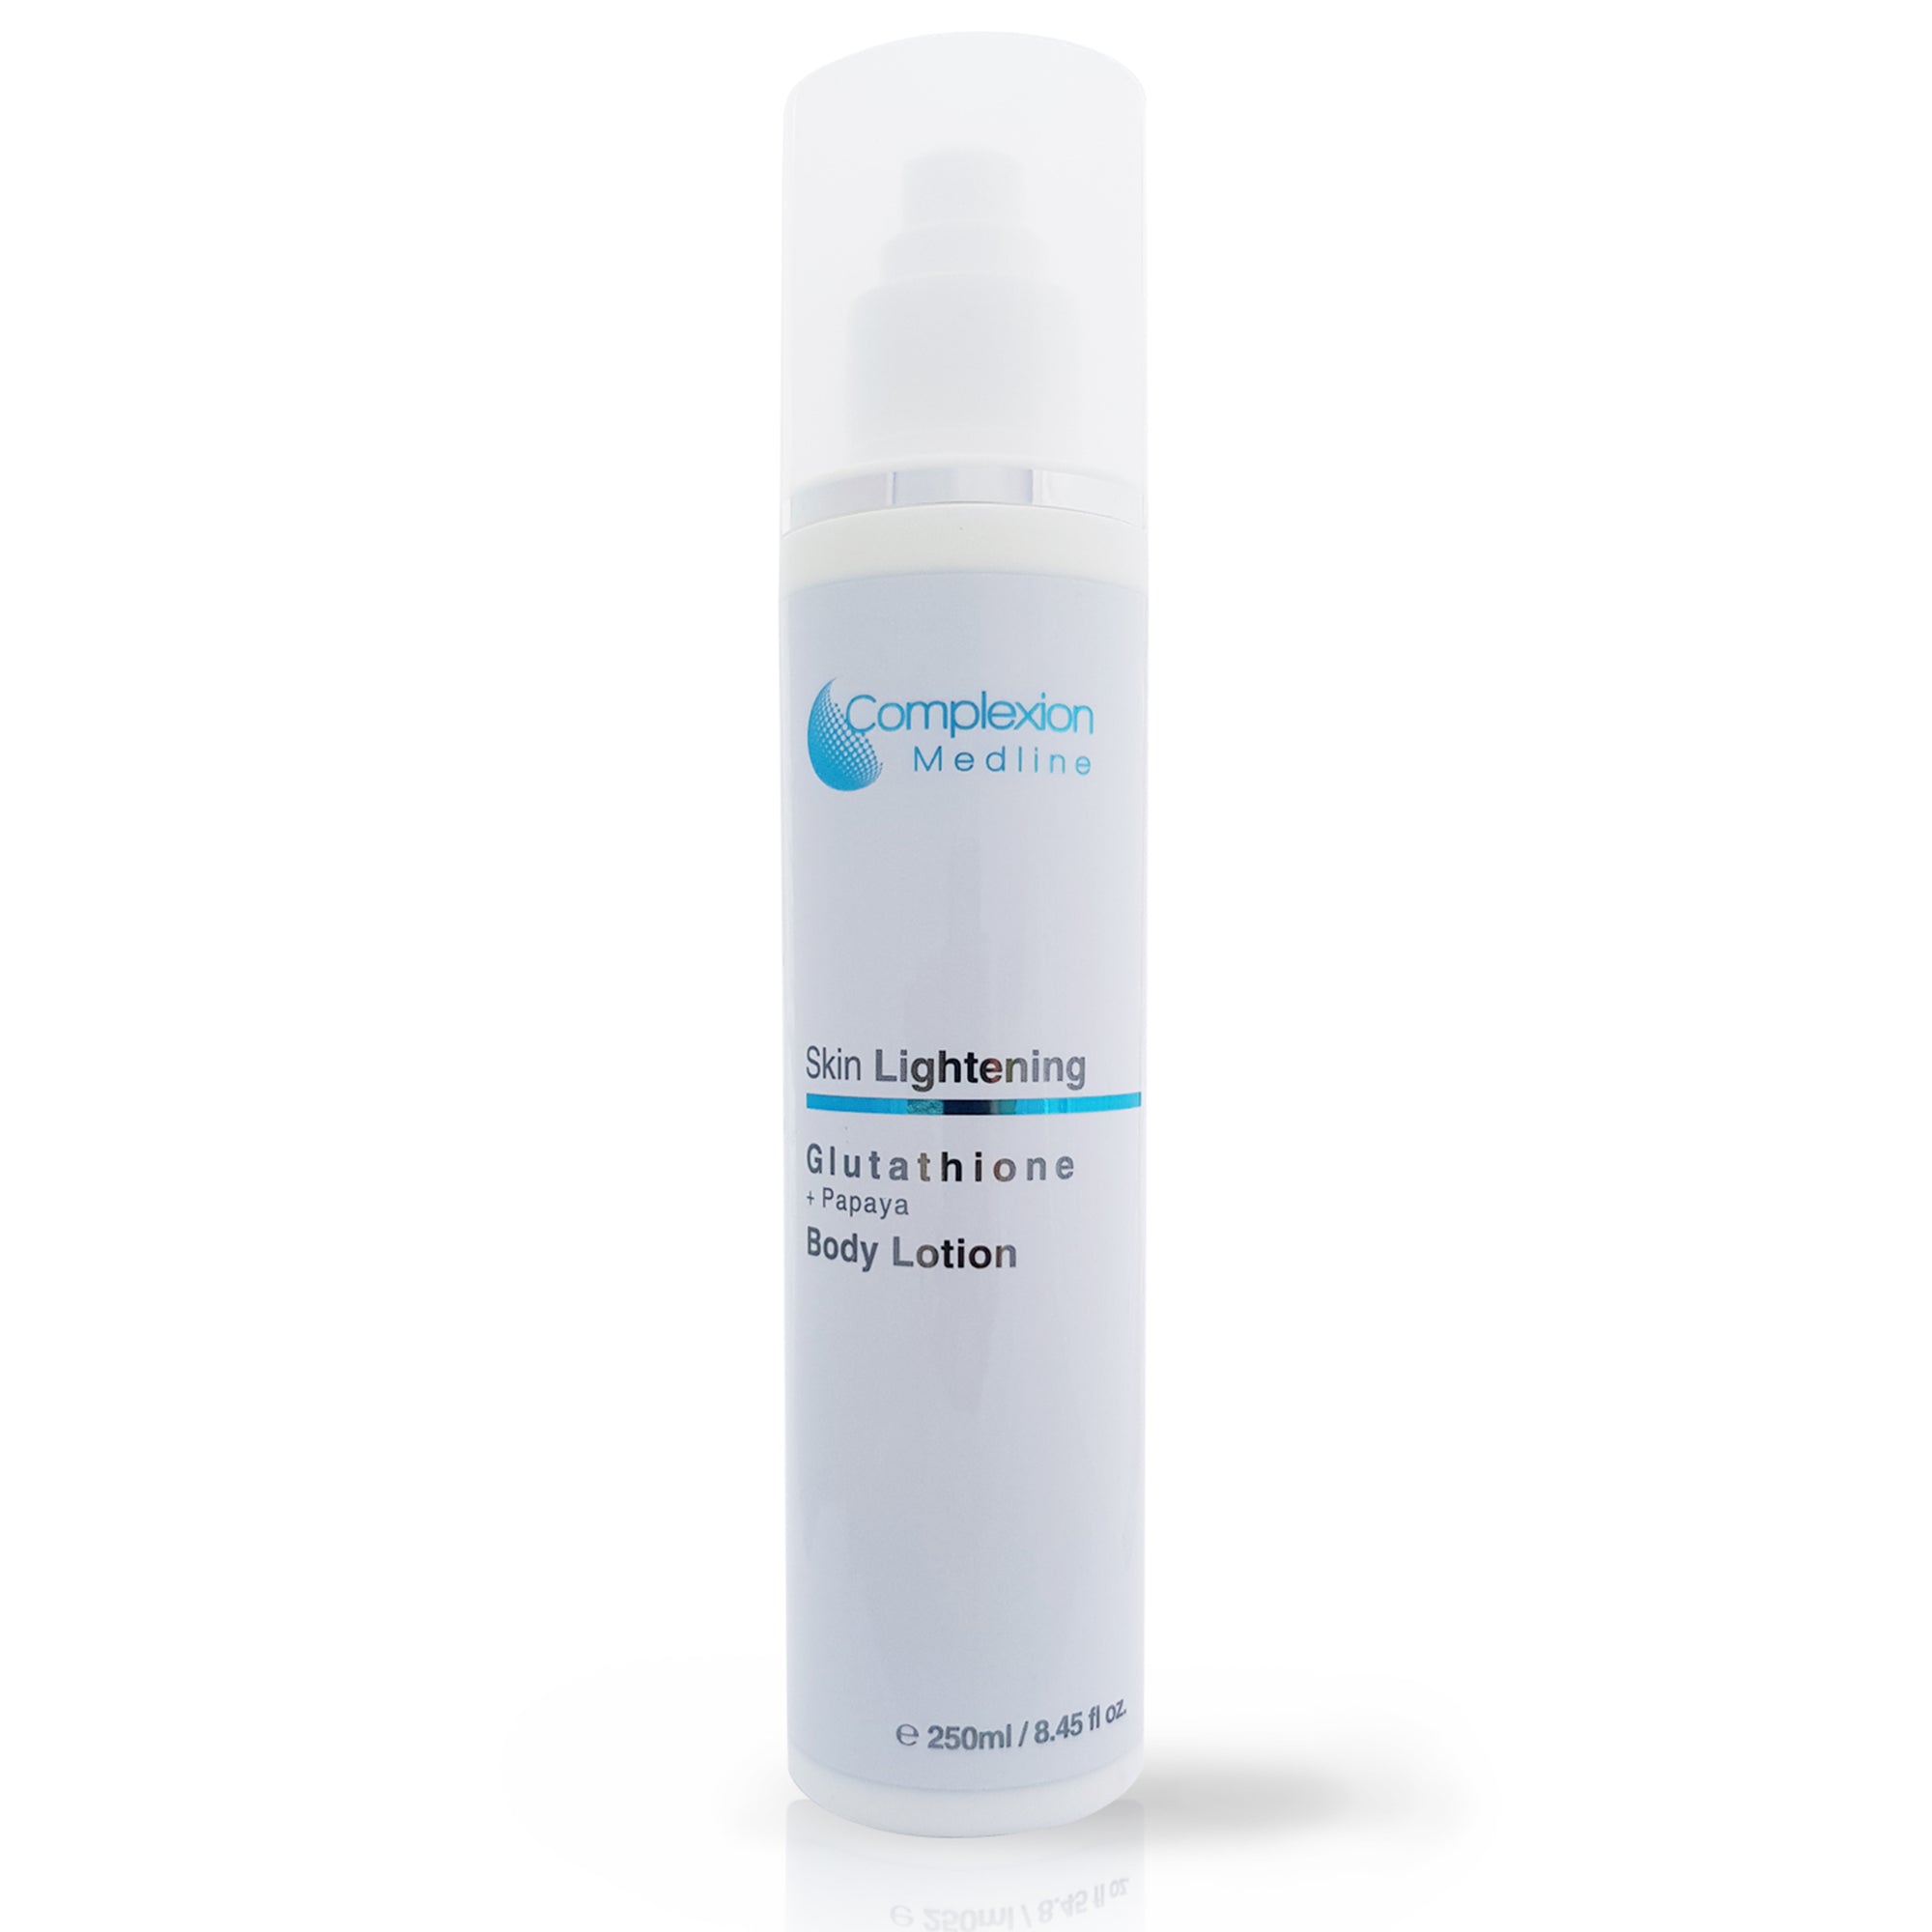 Complexion Medline Skin lightening body lotion for sensitive skin with glutatione and papaya